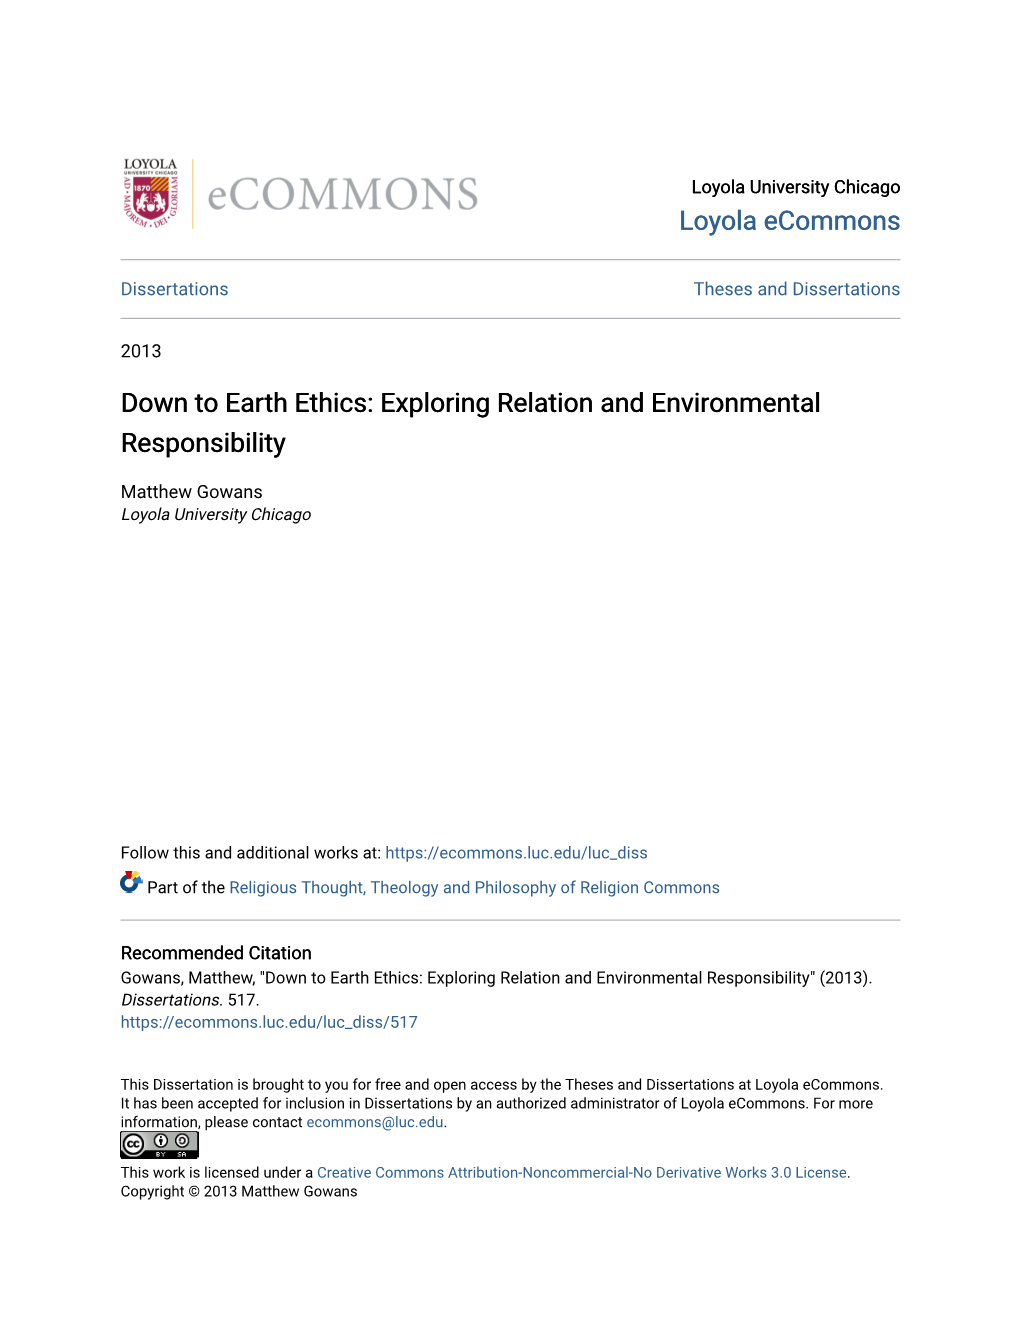 Down to Earth Ethics: Exploring Relation and Environmental Responsibility